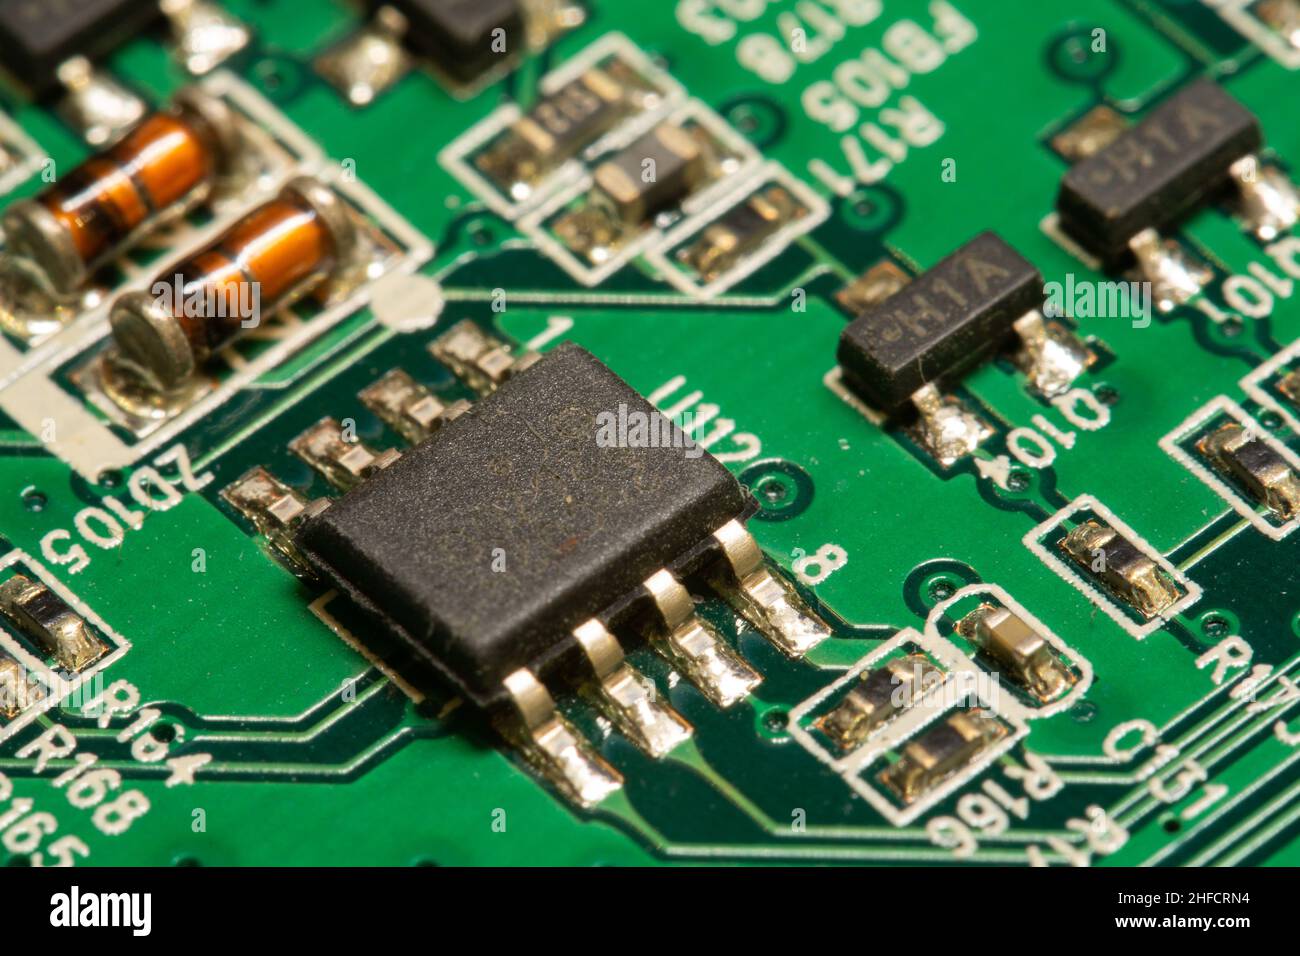 How To Solder On Printed Circuit Boards - Nova